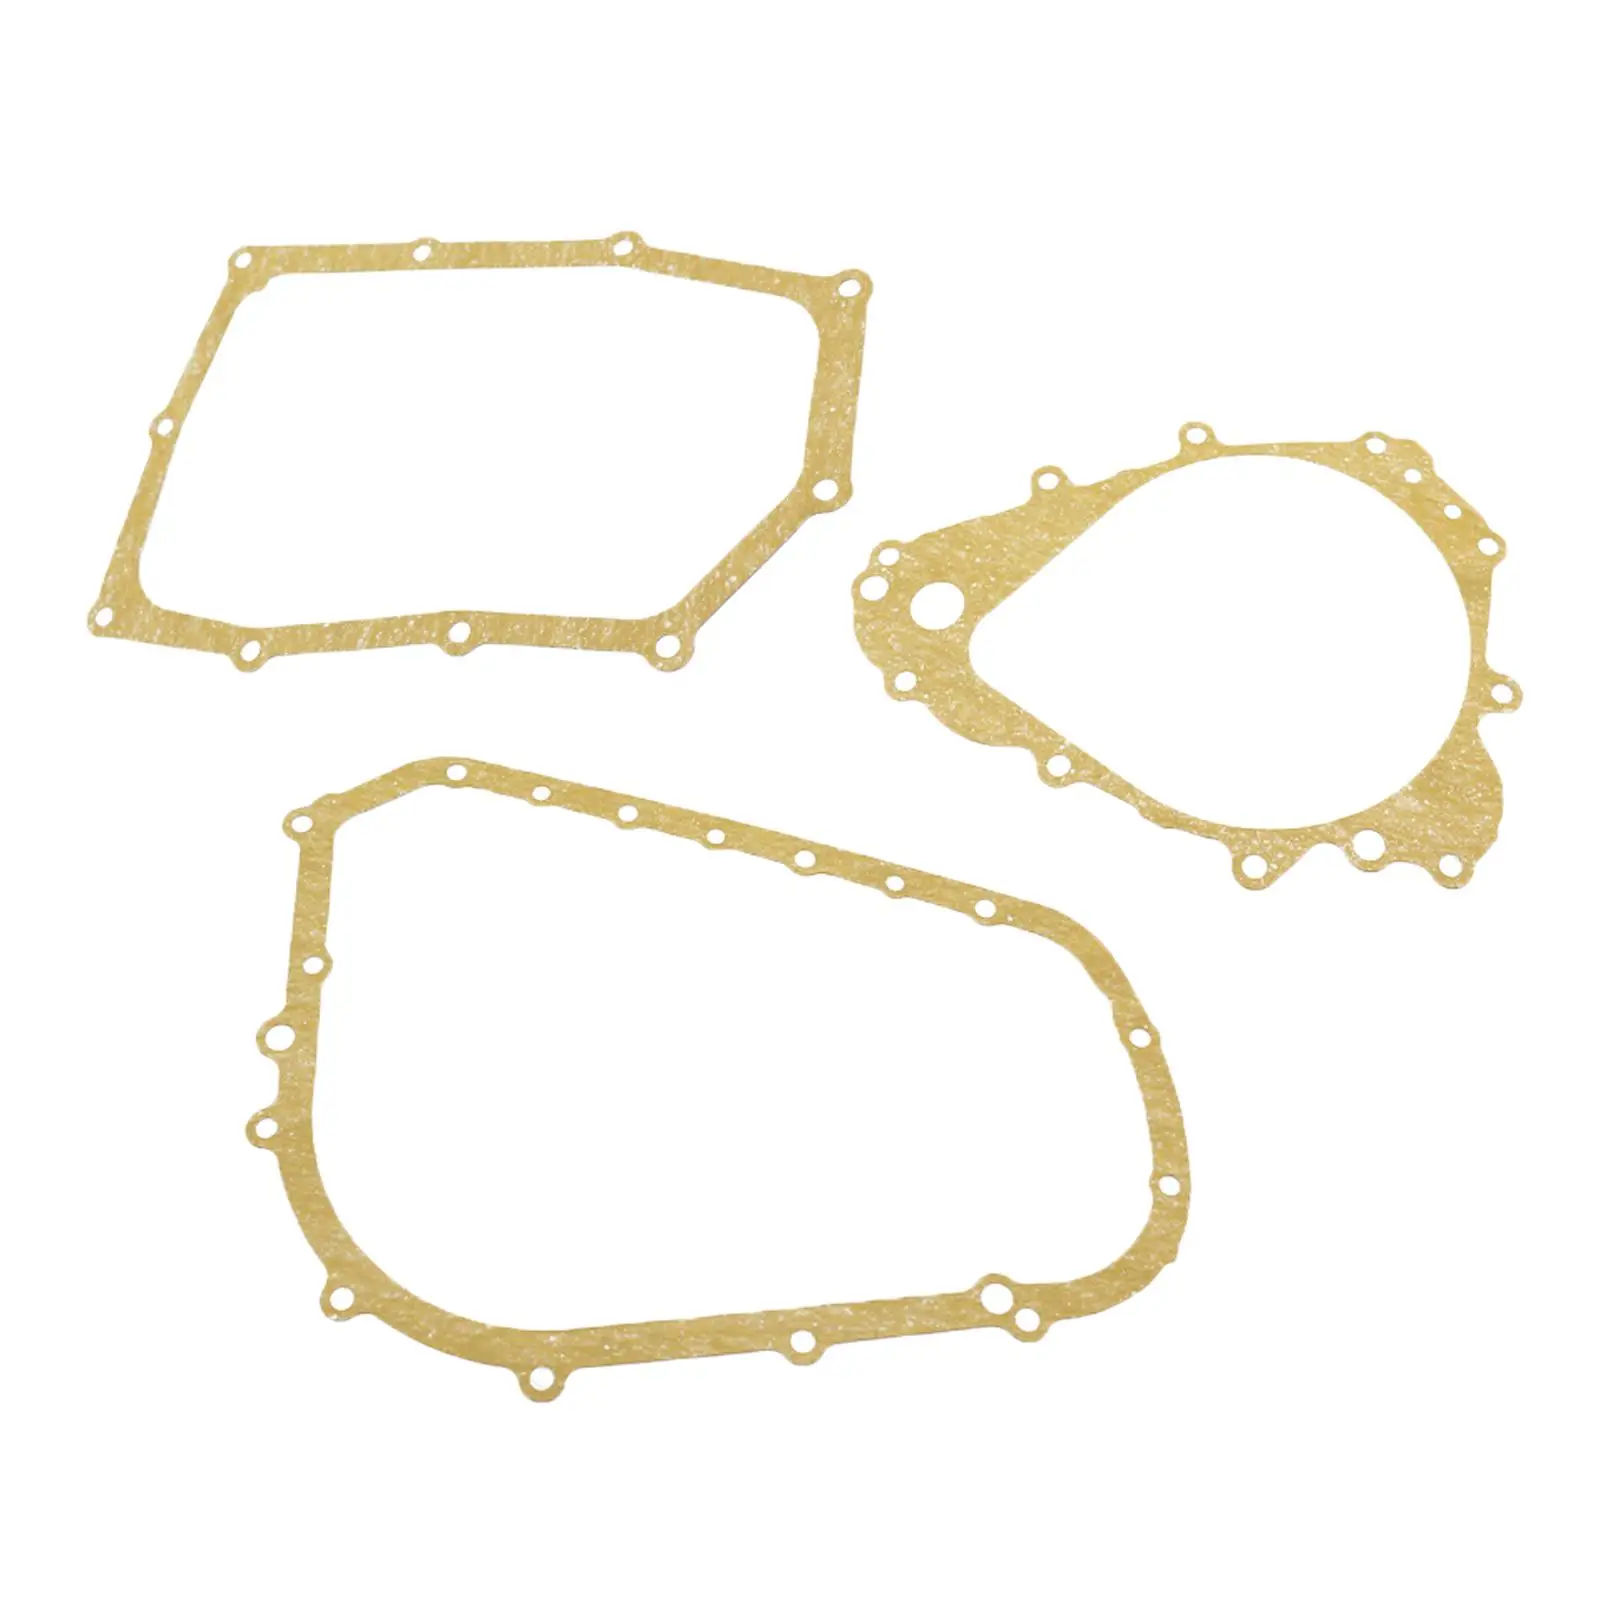 Clutch Oil  Gasket, Replaces, Spare Parts, for 2012-2018 Accessories Easy to Install Durable